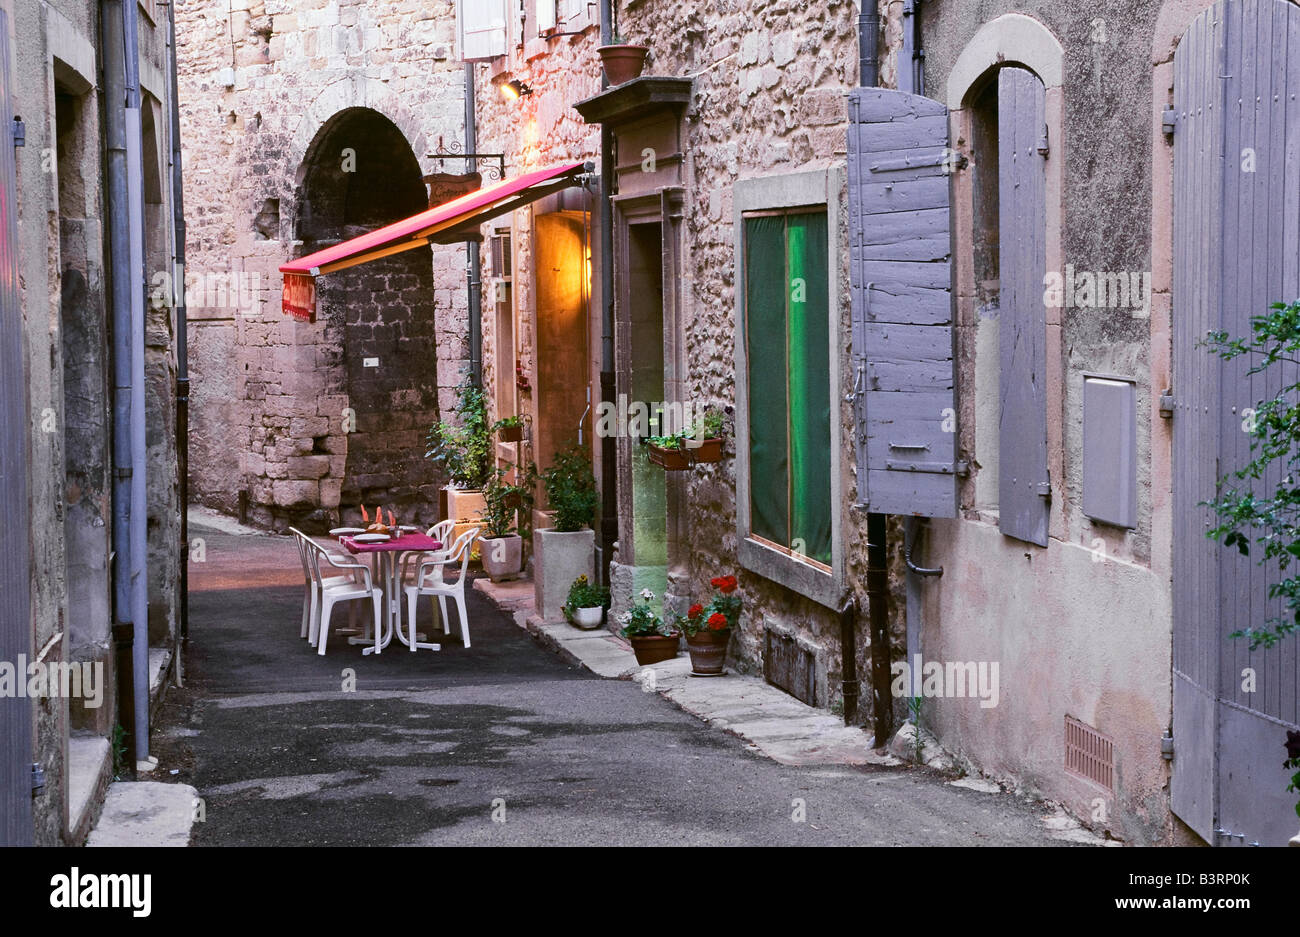 Tables and chairs on small street, Grignan, Provence, France Stock Photo